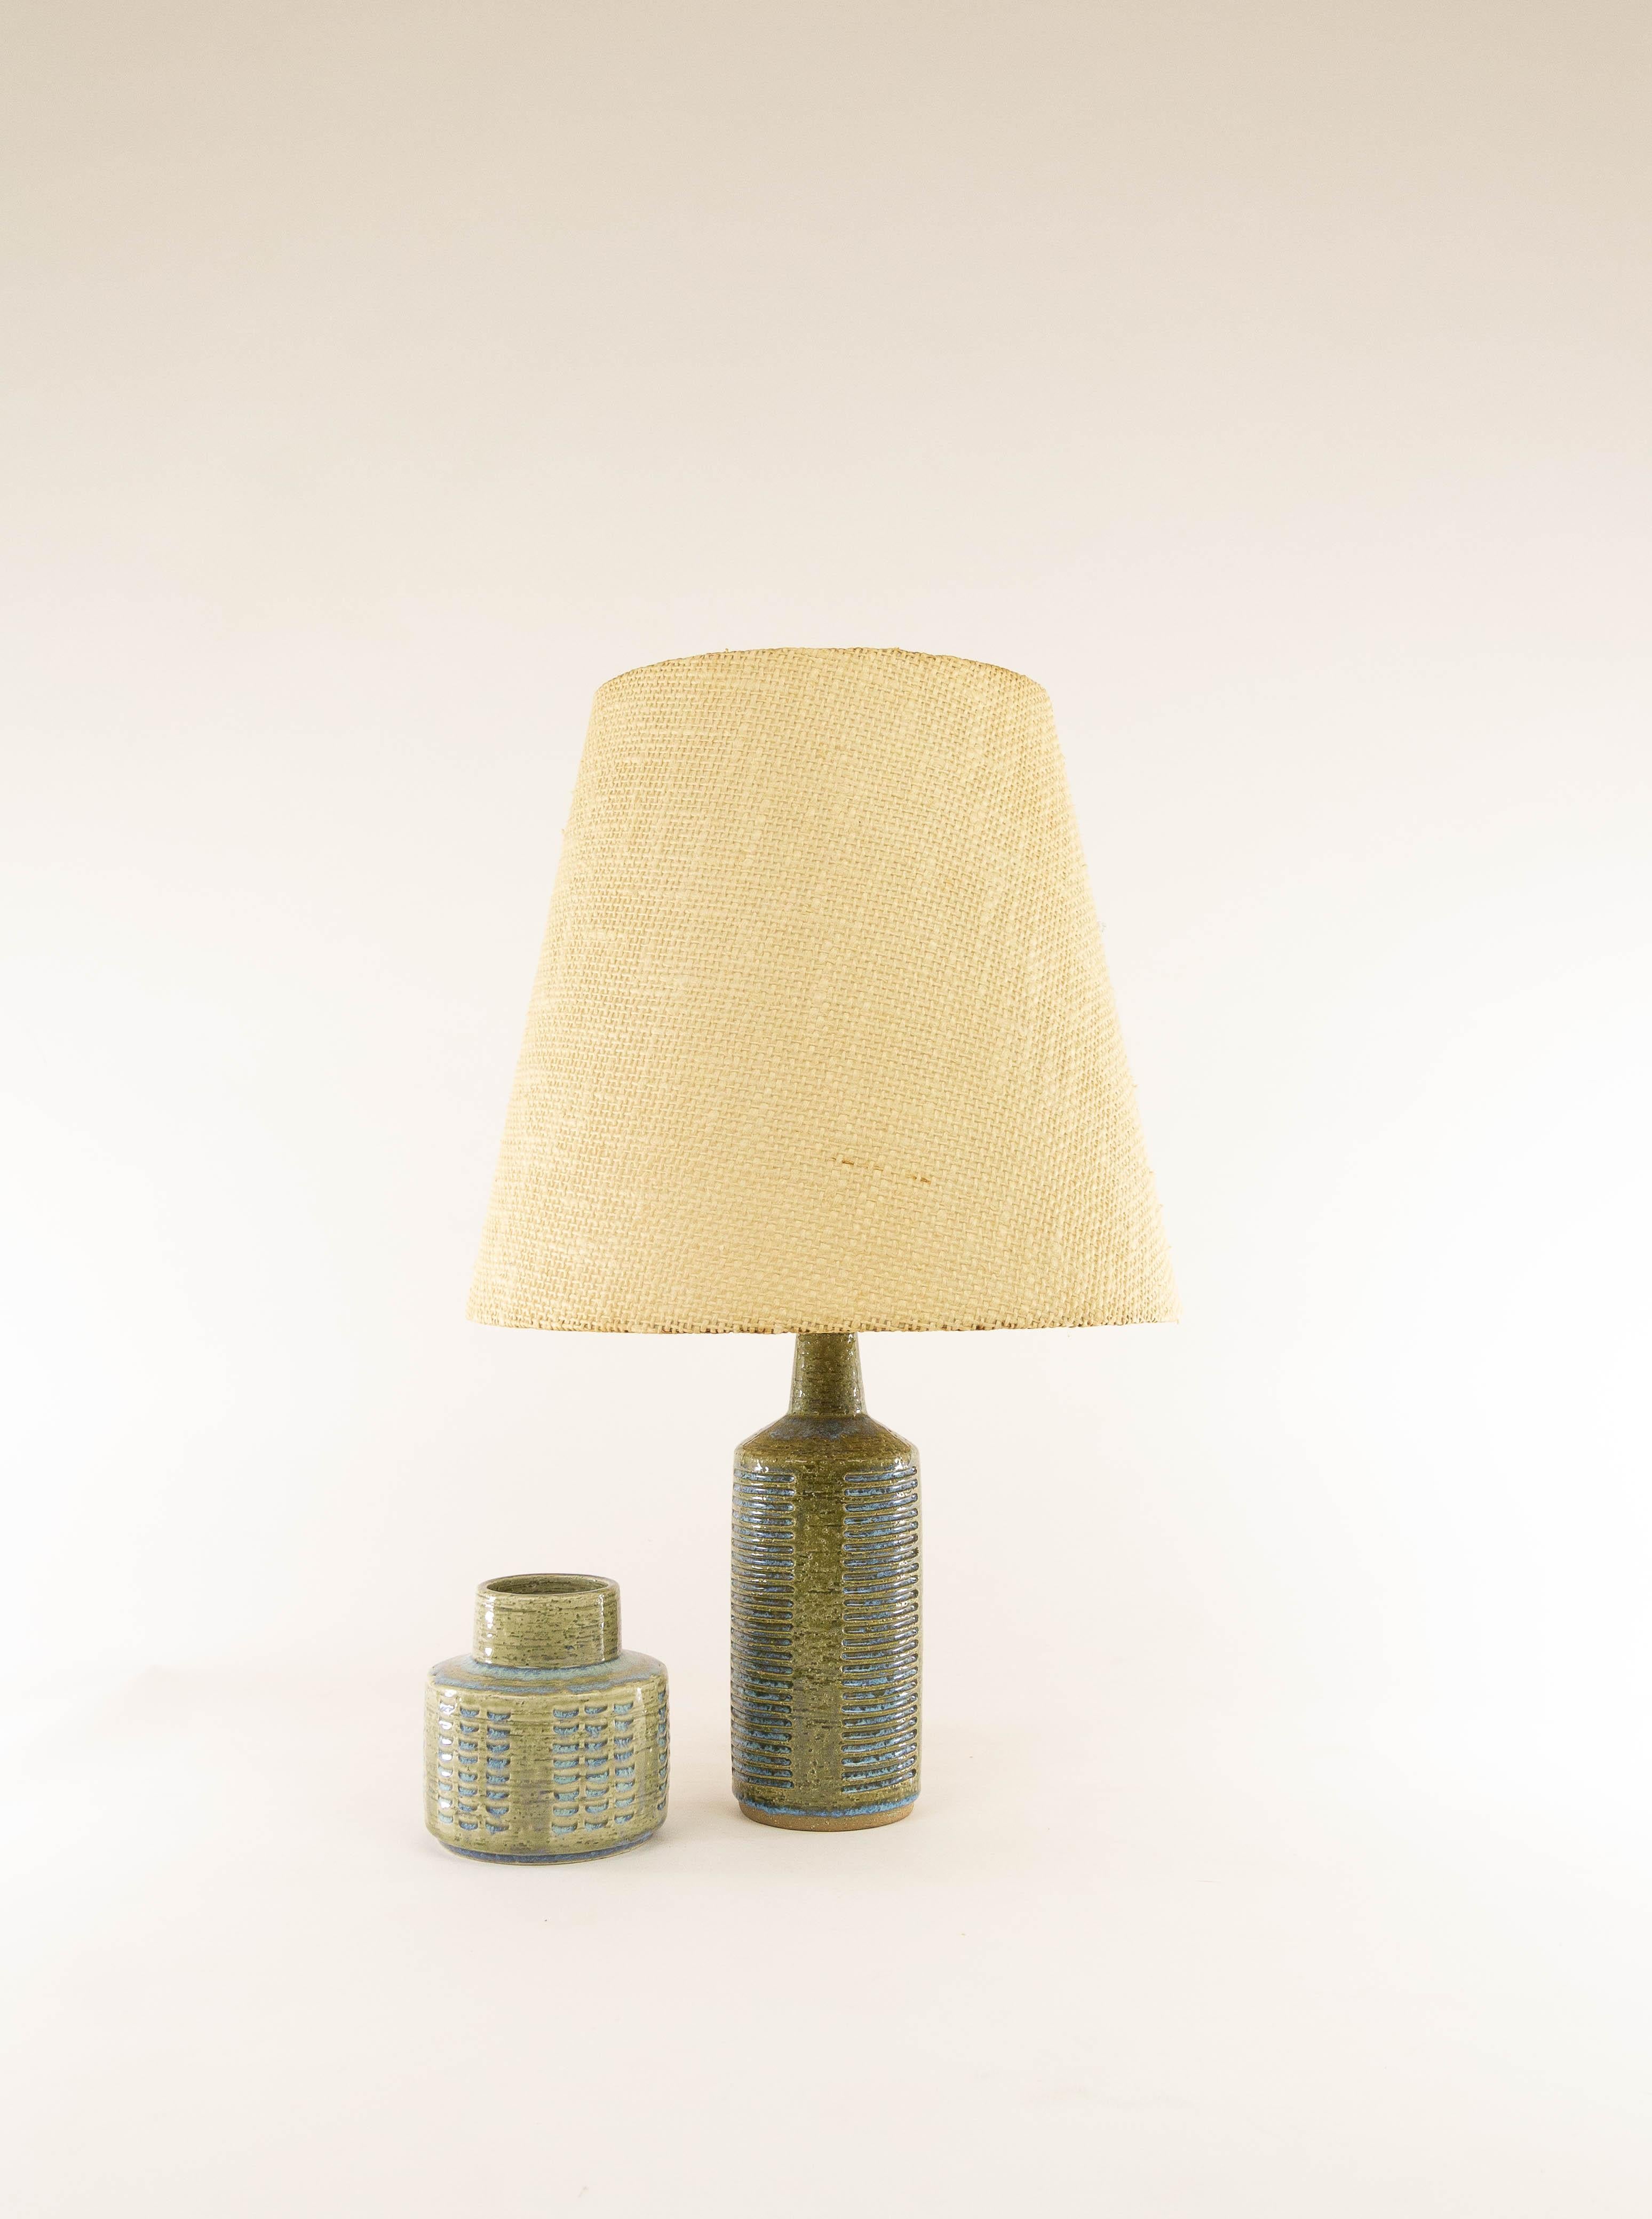 Danish chamotte (texture clay) table lamp with impressed decoration by Annelise and Per Linnemann-Schmidt for Palshus Denmark, 1960s.

Palshus produced a wide range of table lamps, in different patterns, height and colors (various shades of brown,